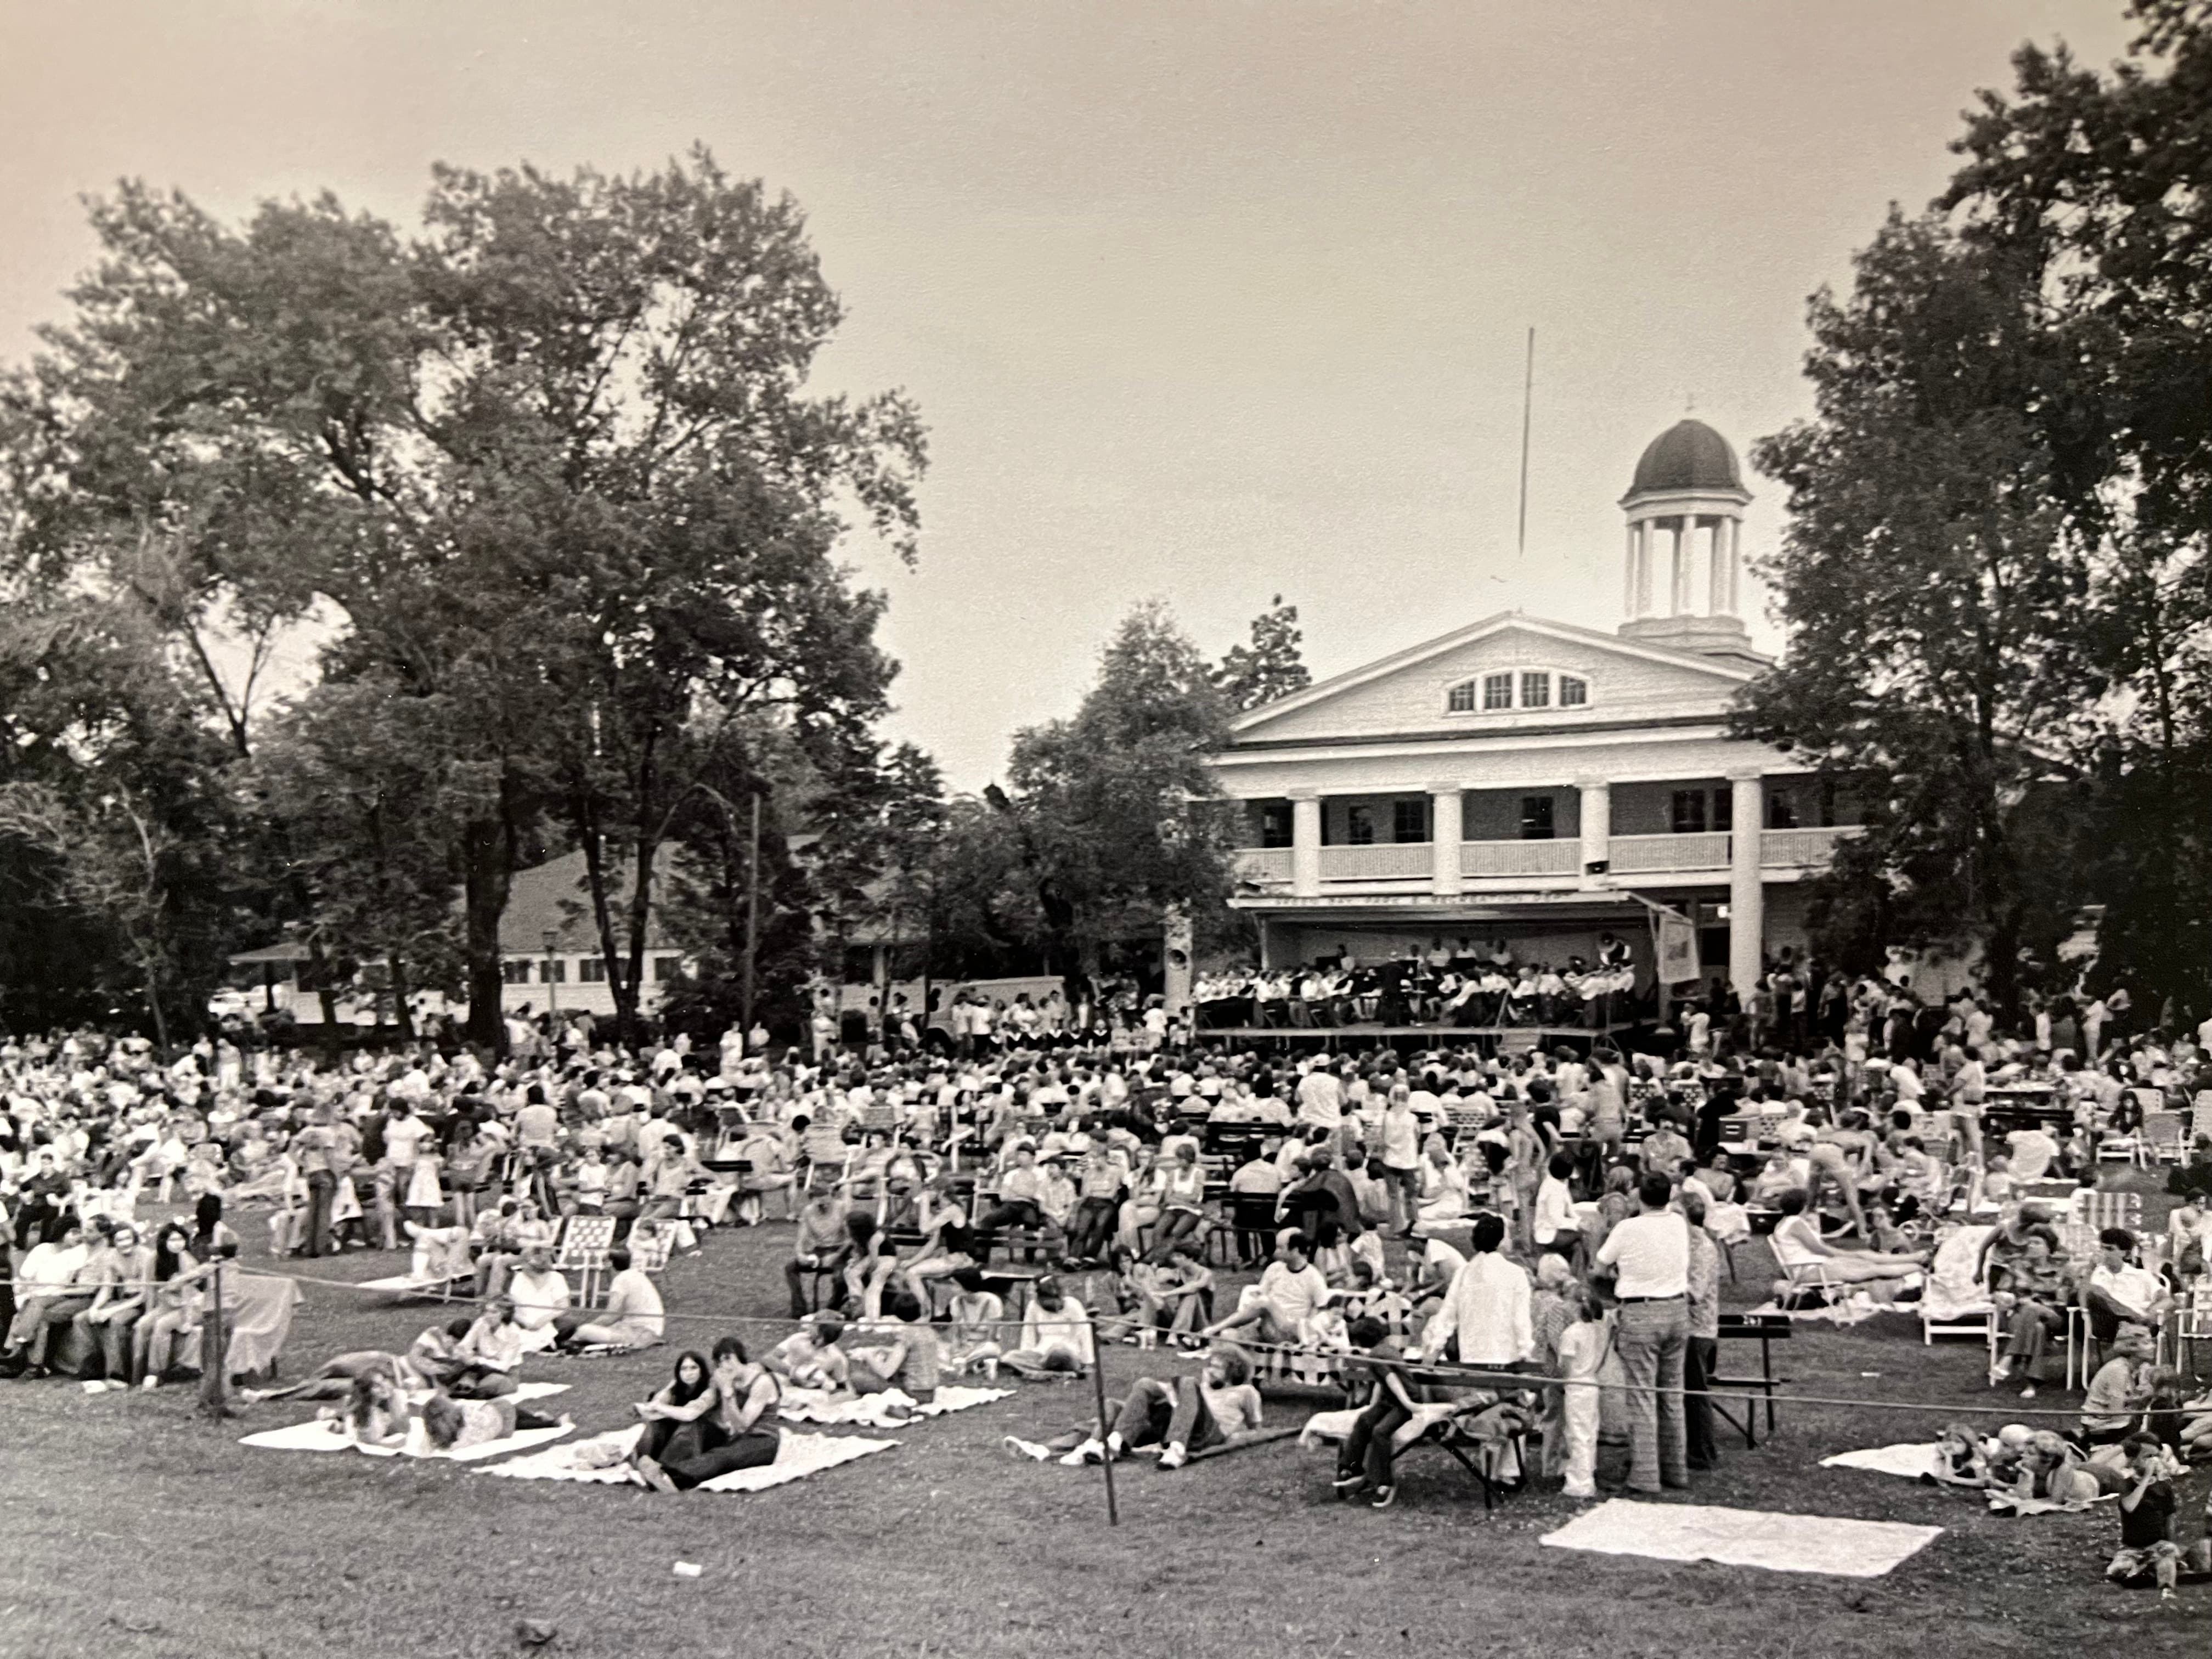 A black and white photo of the band playing a concert at Bay Beach. The lawn is full of people sitting on blankets and folding chairs.